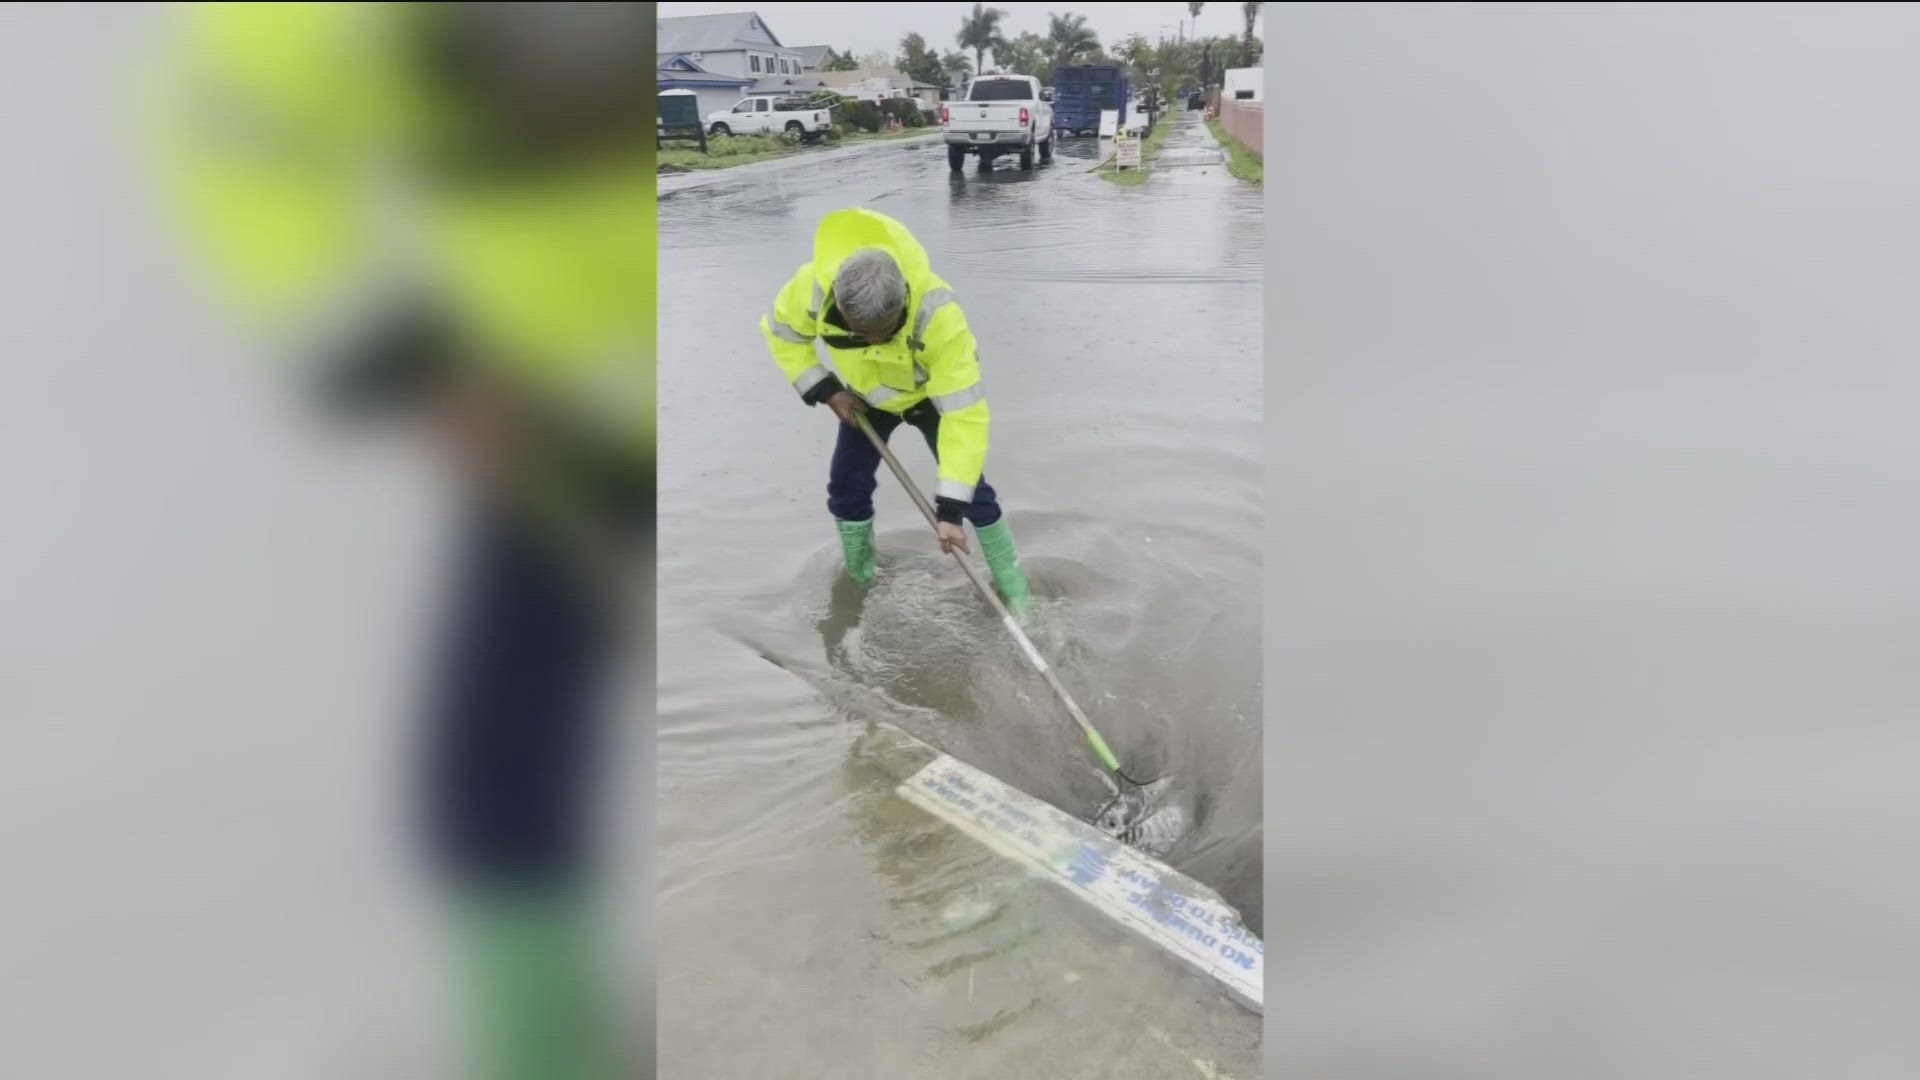 The lawsuit alleges that the city's failure to maintain and improve the storm drains resulted in the flood that destroyed homes, businesses and belongings.